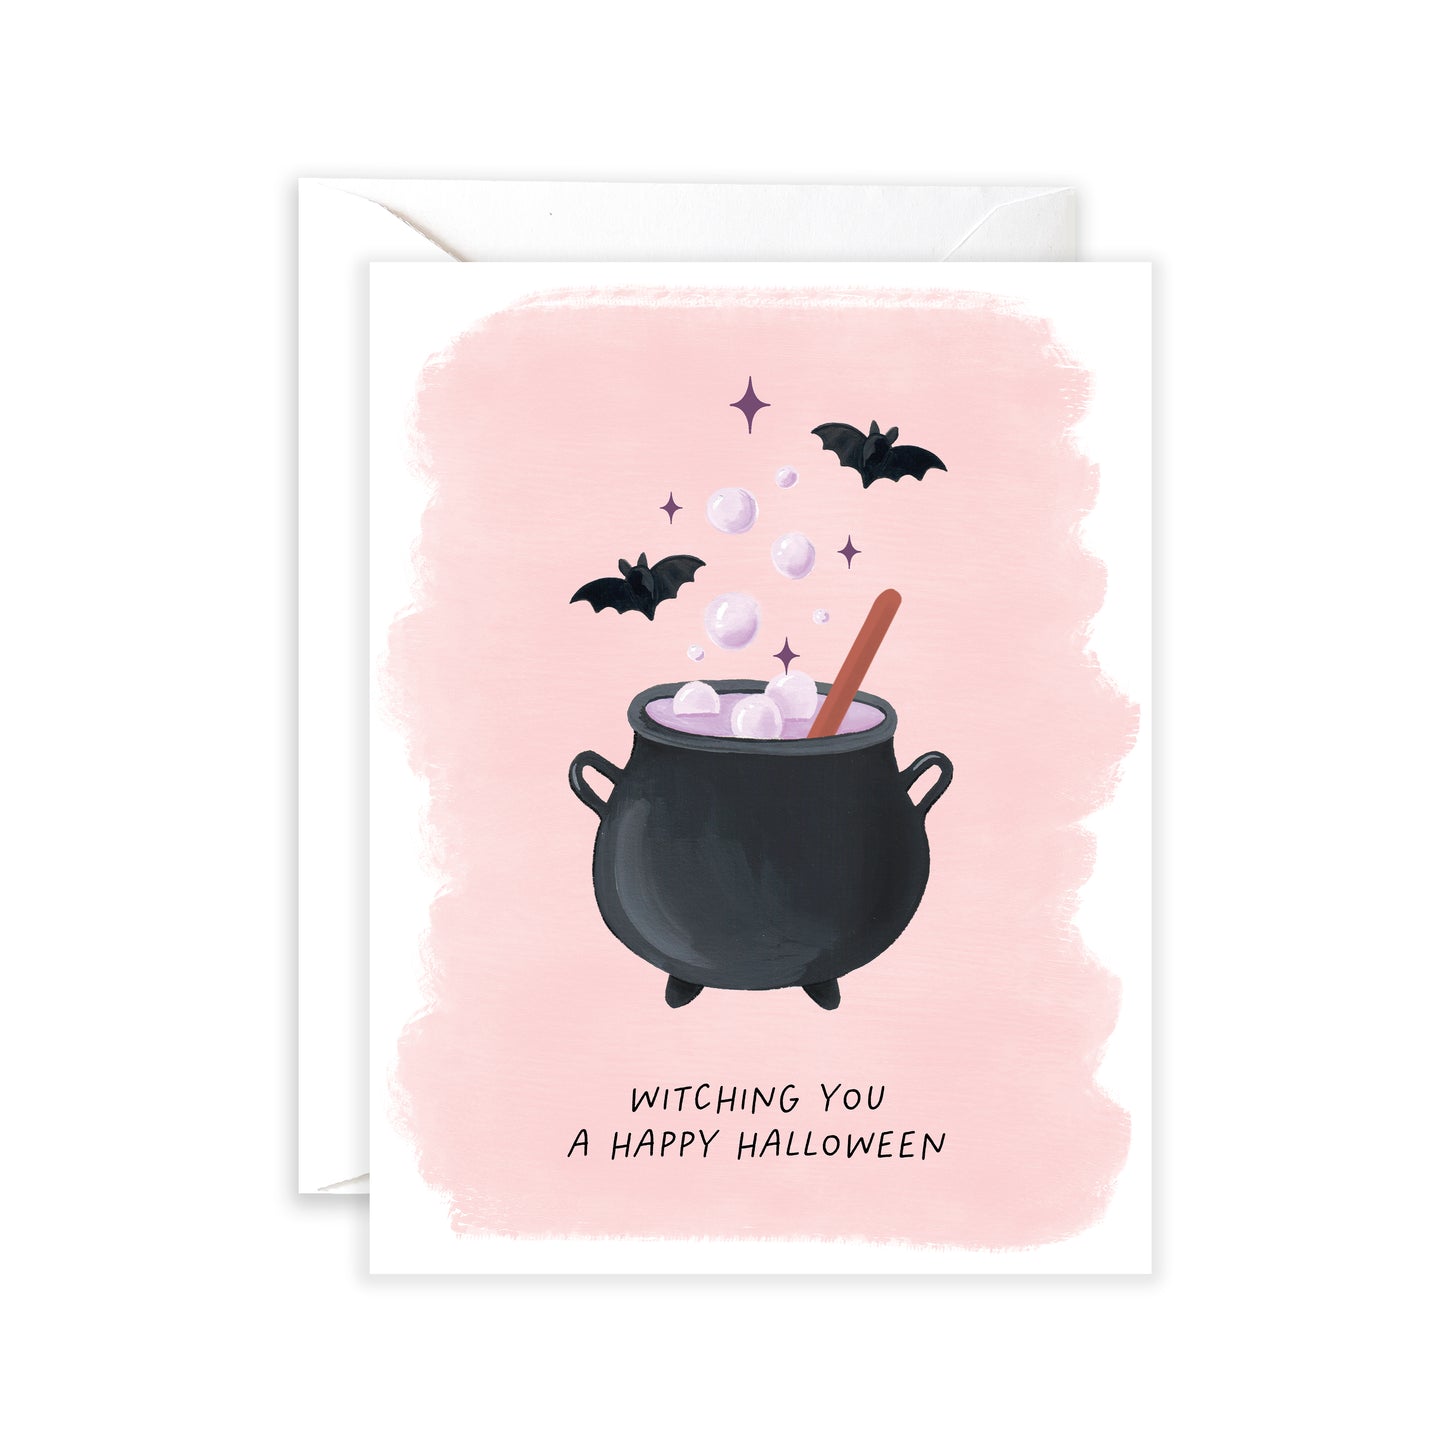 Witching You a Happy Halloween Greeting Card